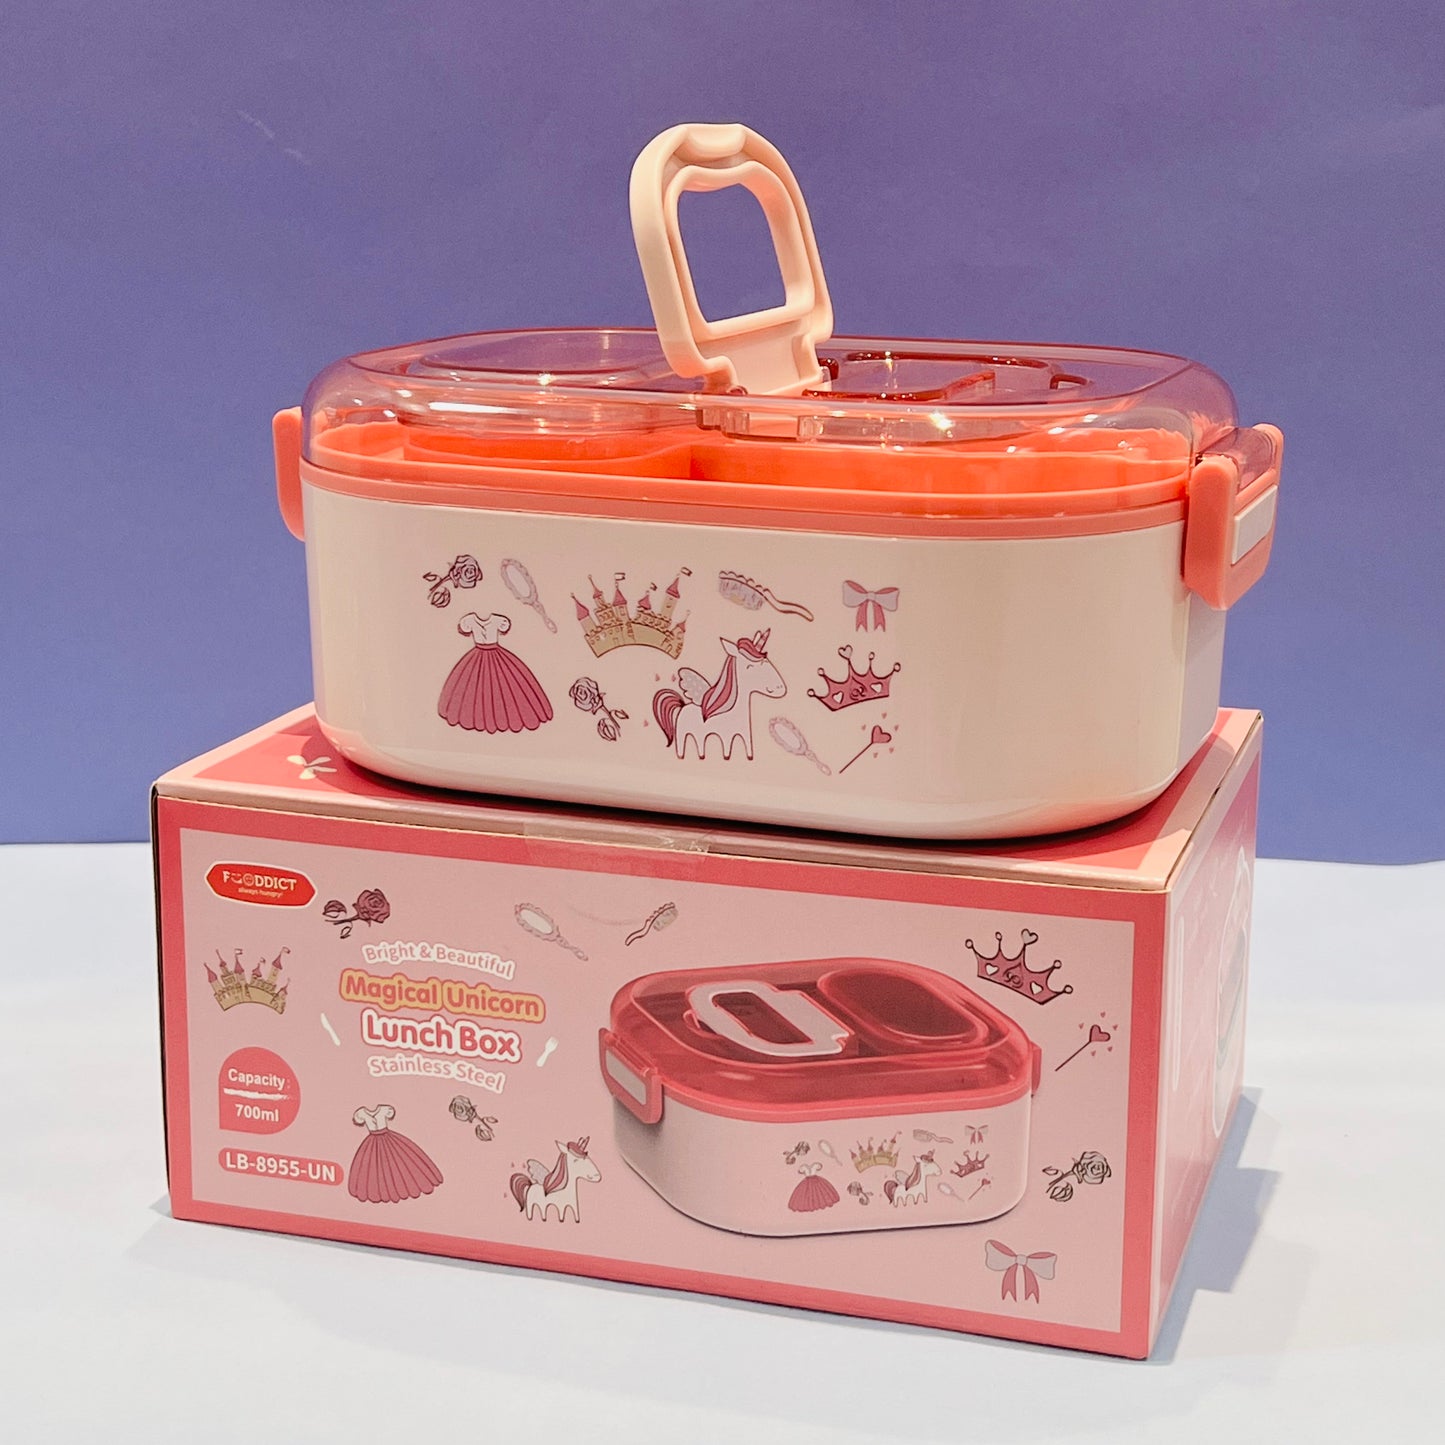 Unicorn Themed Lunch Box : 700ml Capacity with Mobile Holder